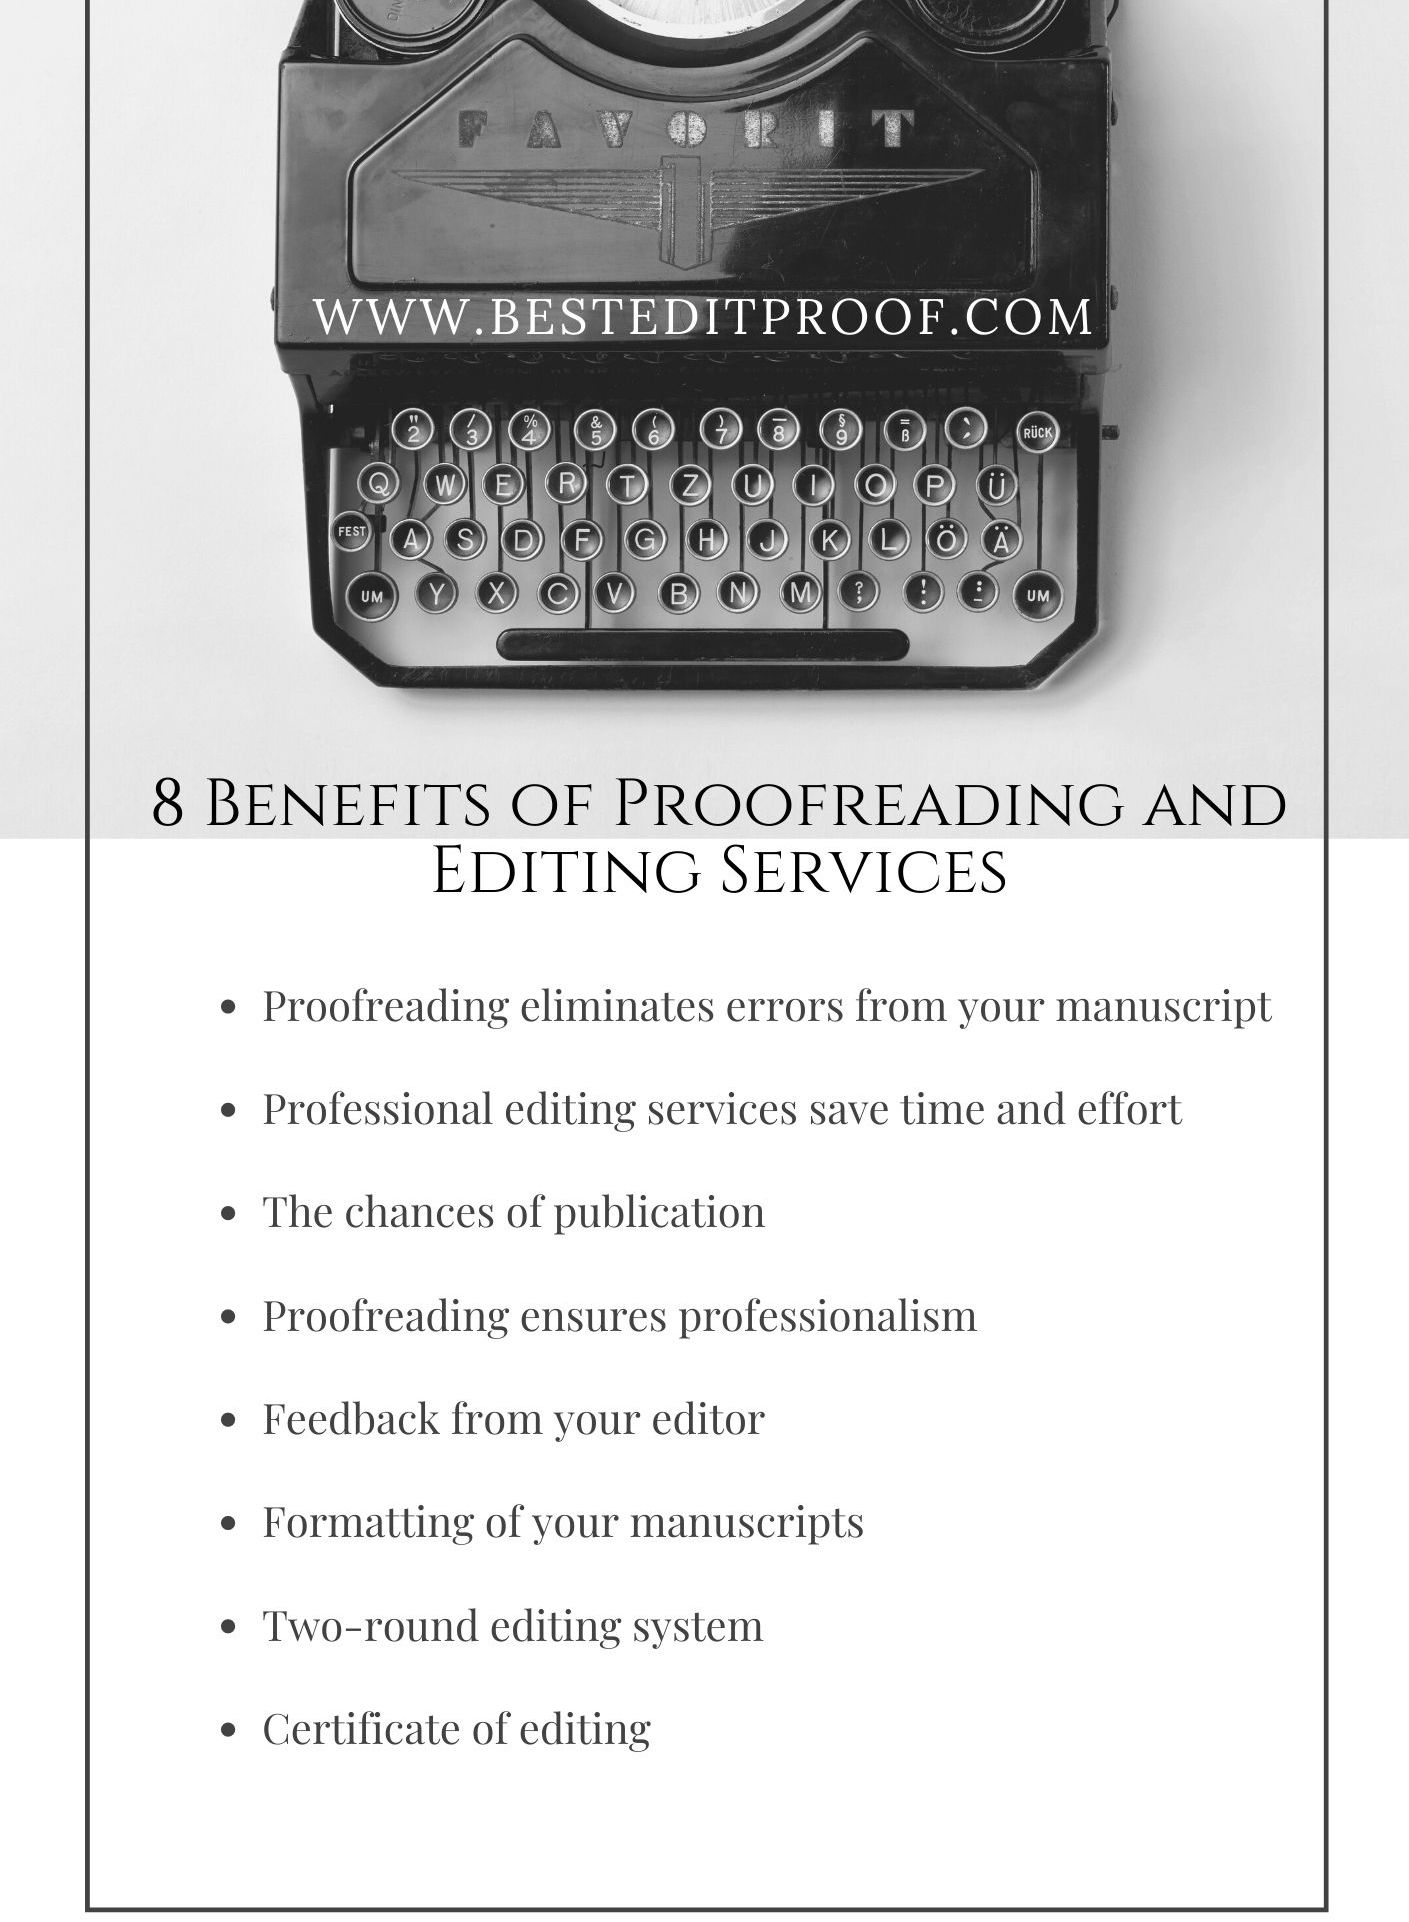 8 Benefits of Using Professional Proofreading and Editing Services